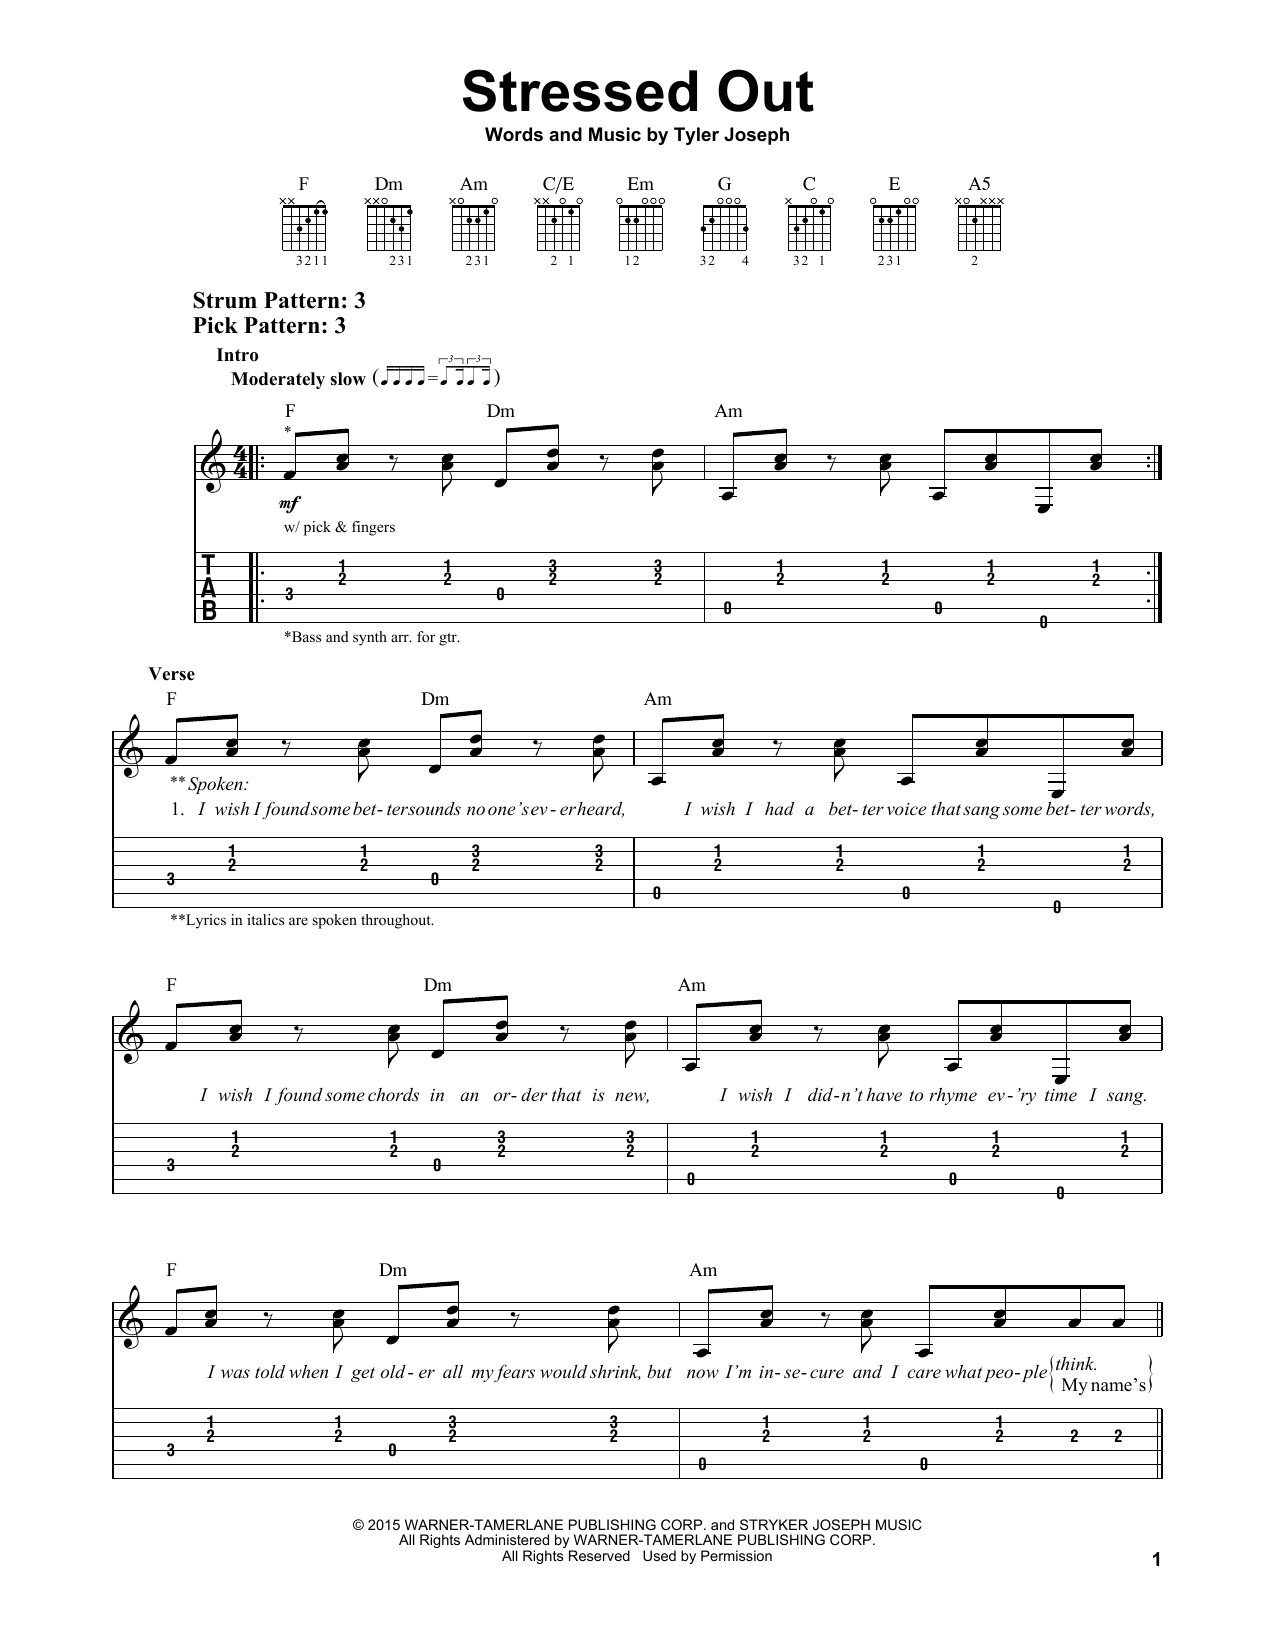 Download Twenty One Pilots Stressed Out Sheet Music